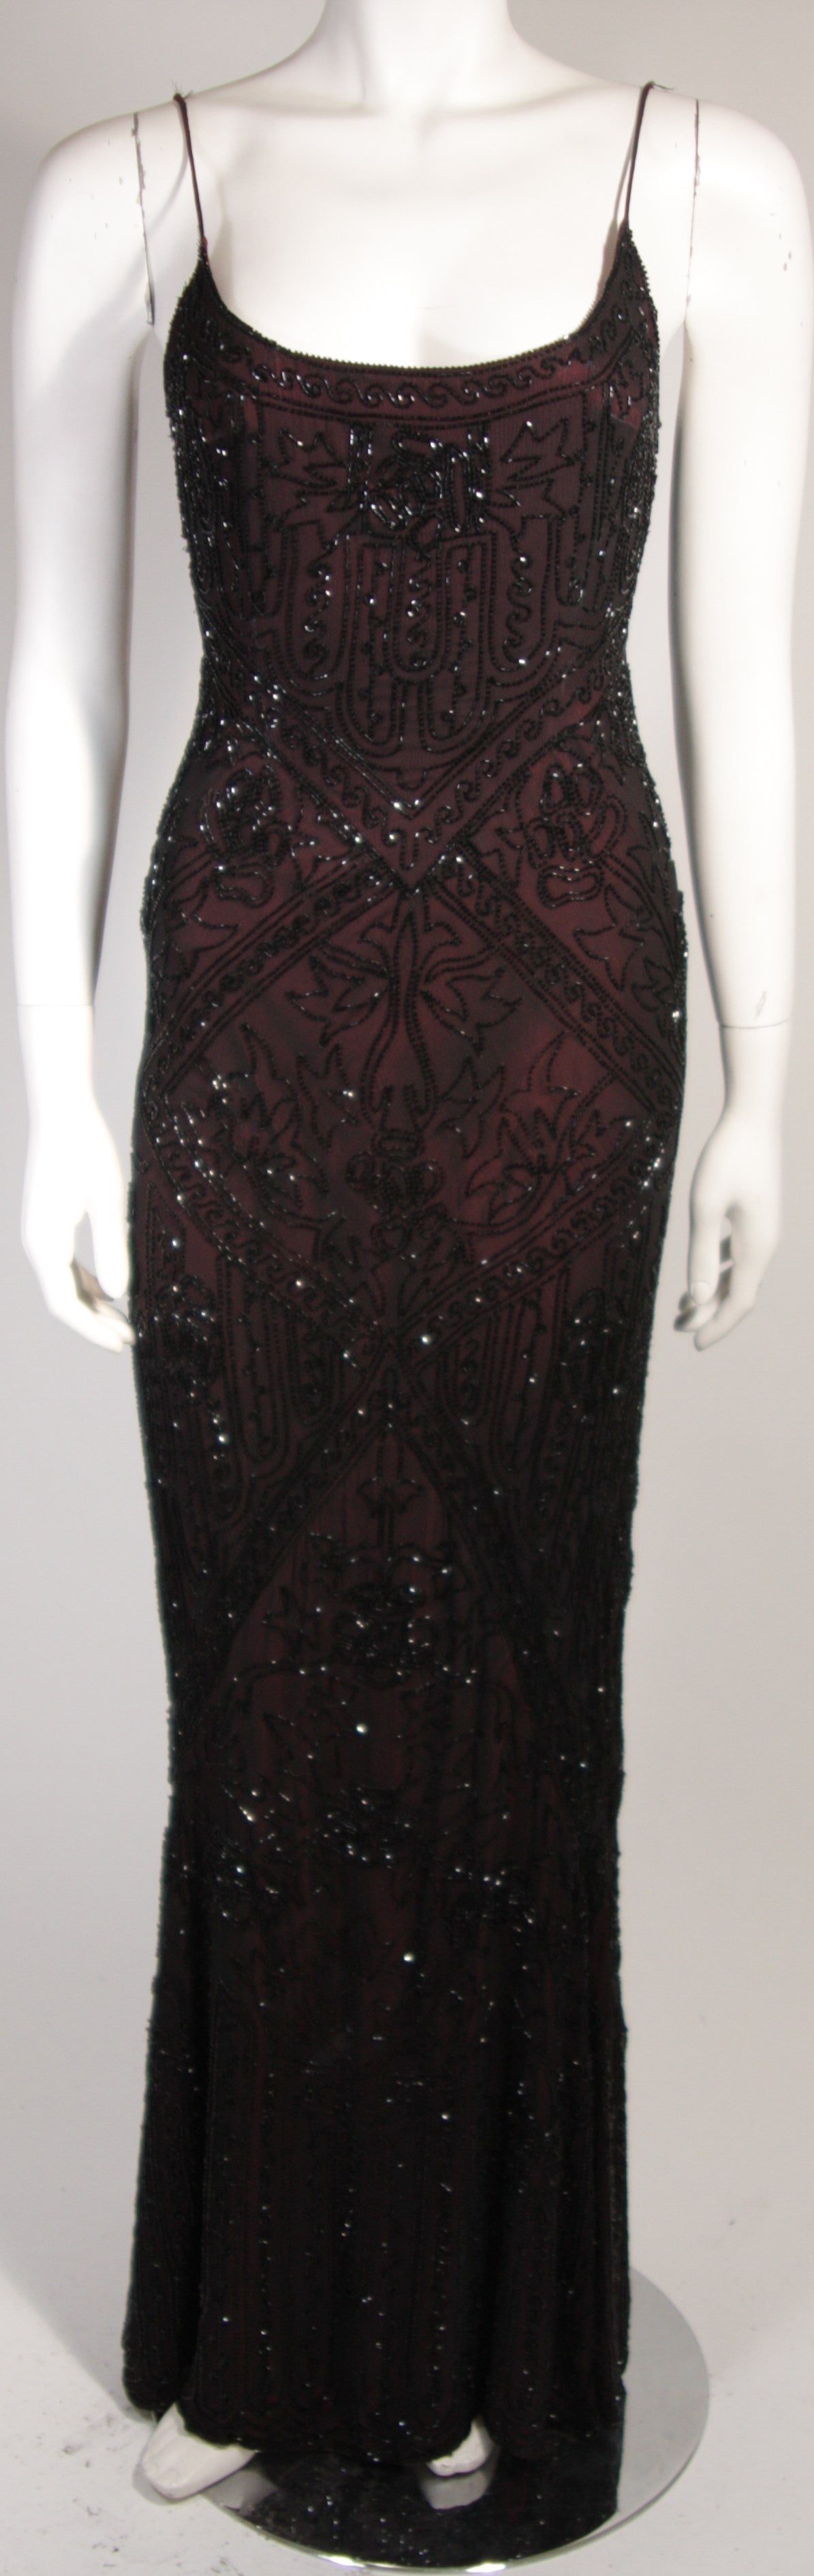 Les Habitudes Deco Inspired Burgundy Beaded Gown Size M at 1stDibs